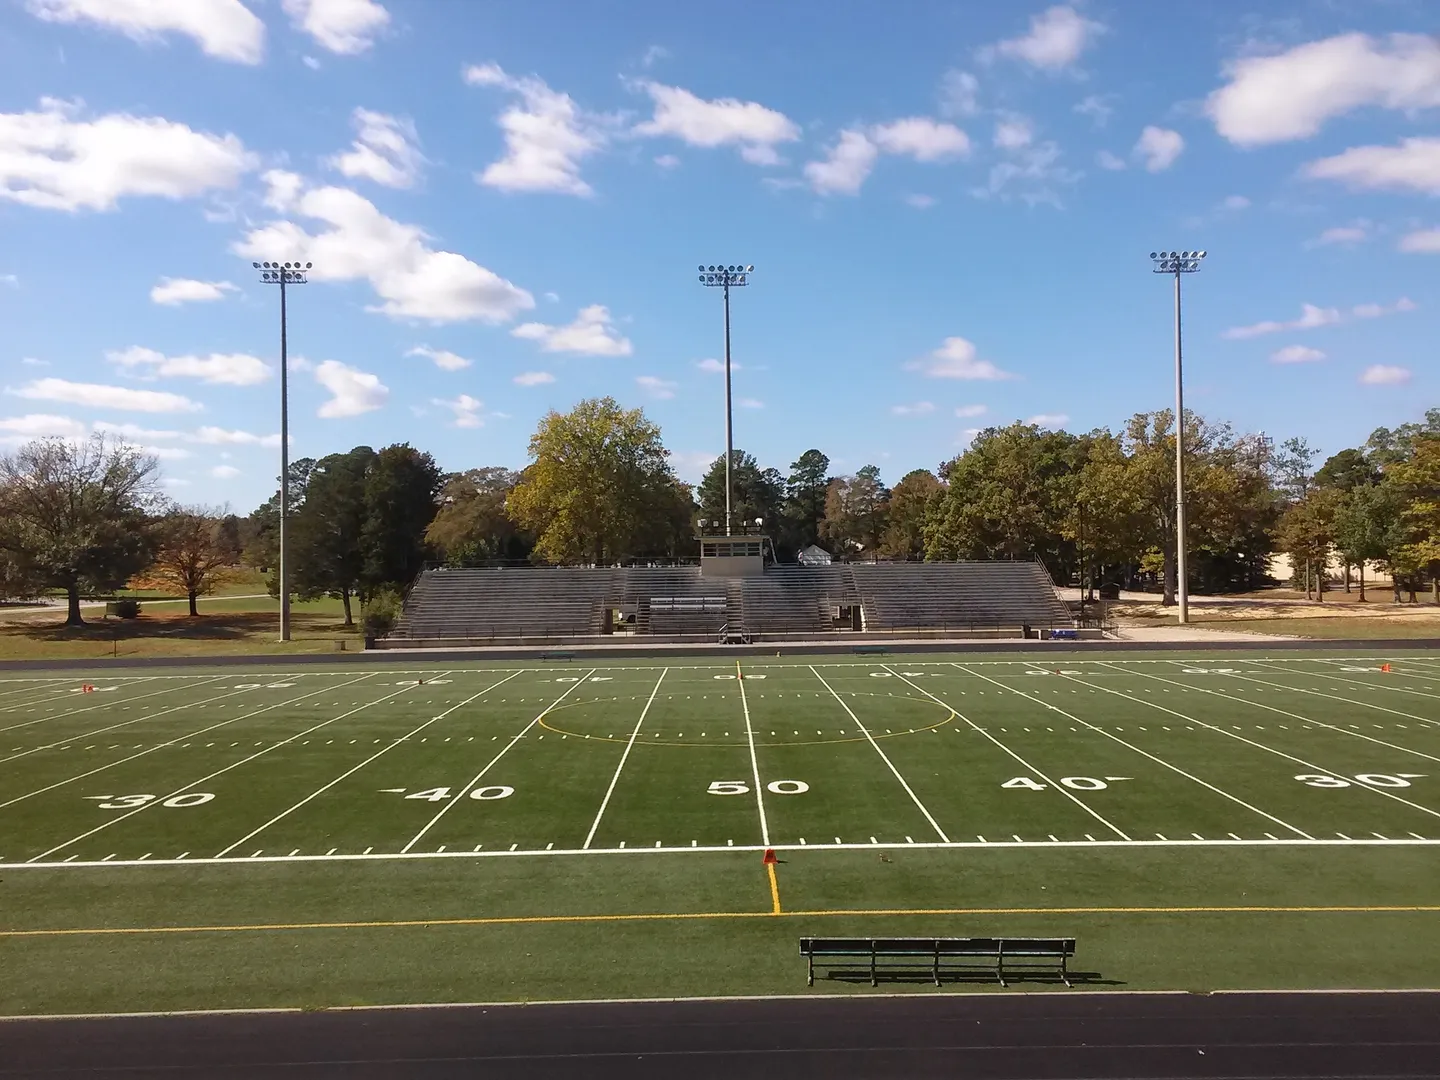 A football field with bleachers and benches.